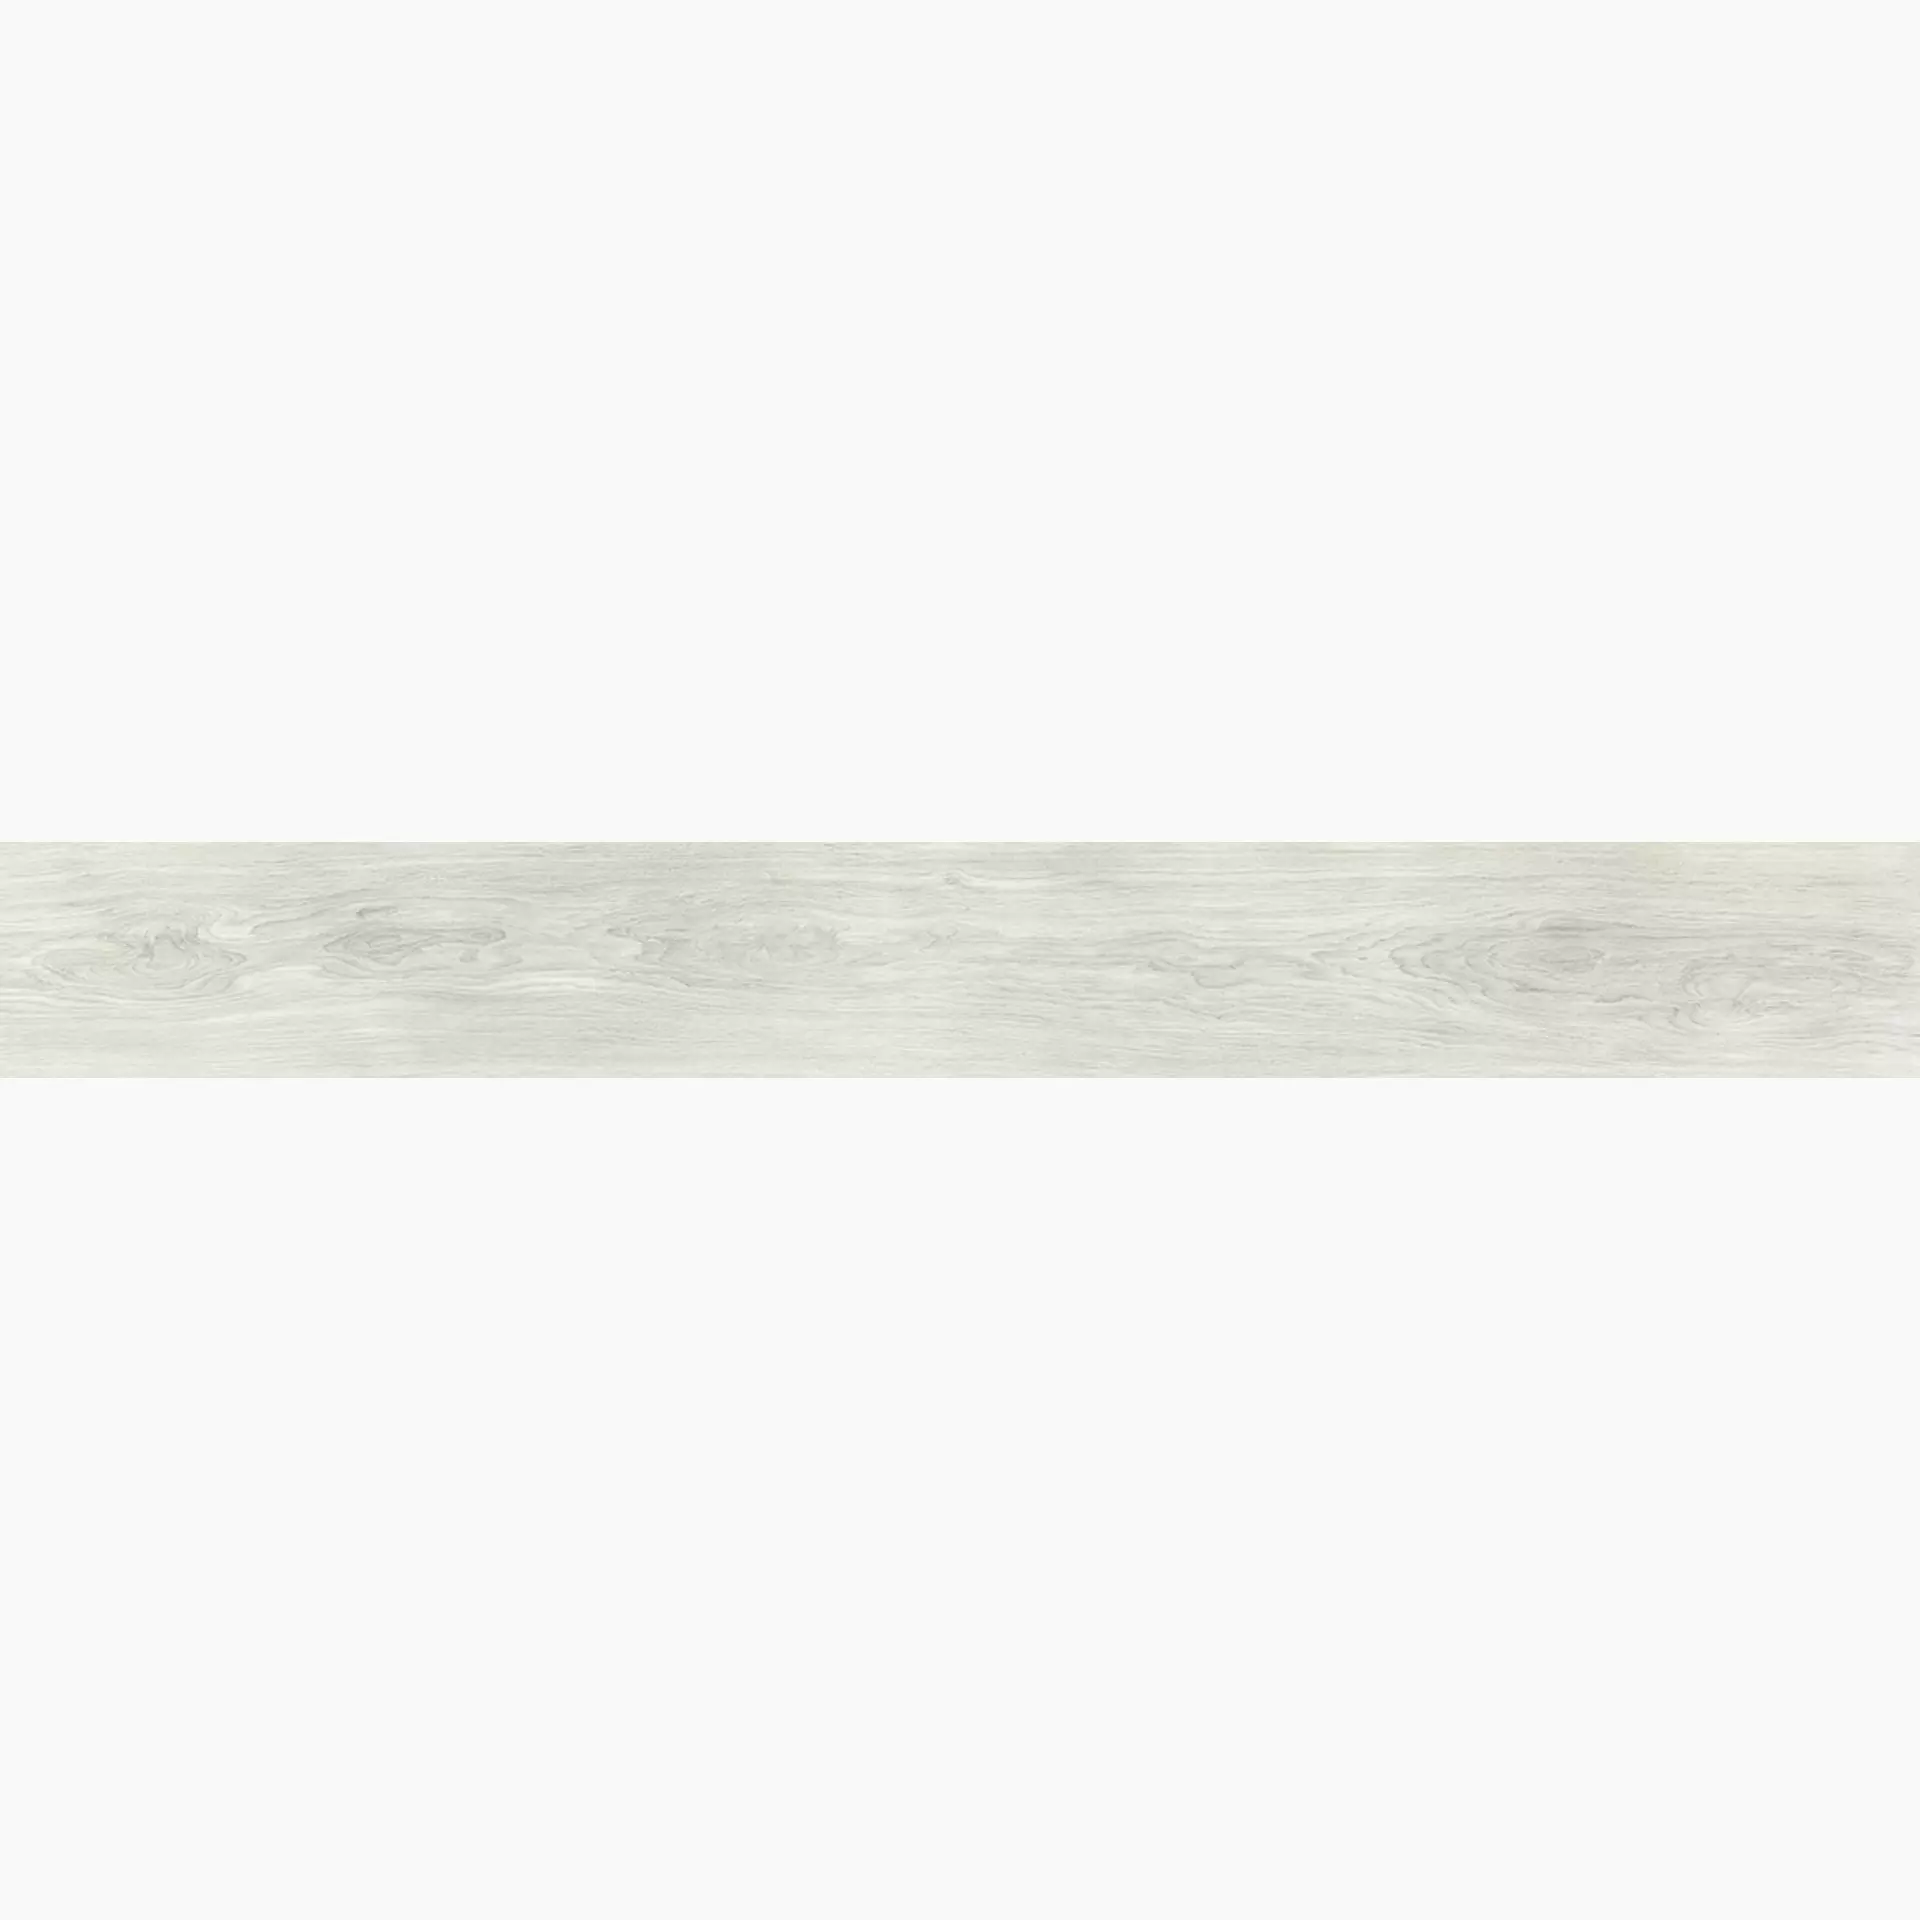 Ergon Woodtouch Sbiancato Naturale E0M1 22,5x180cm rectified 10mm